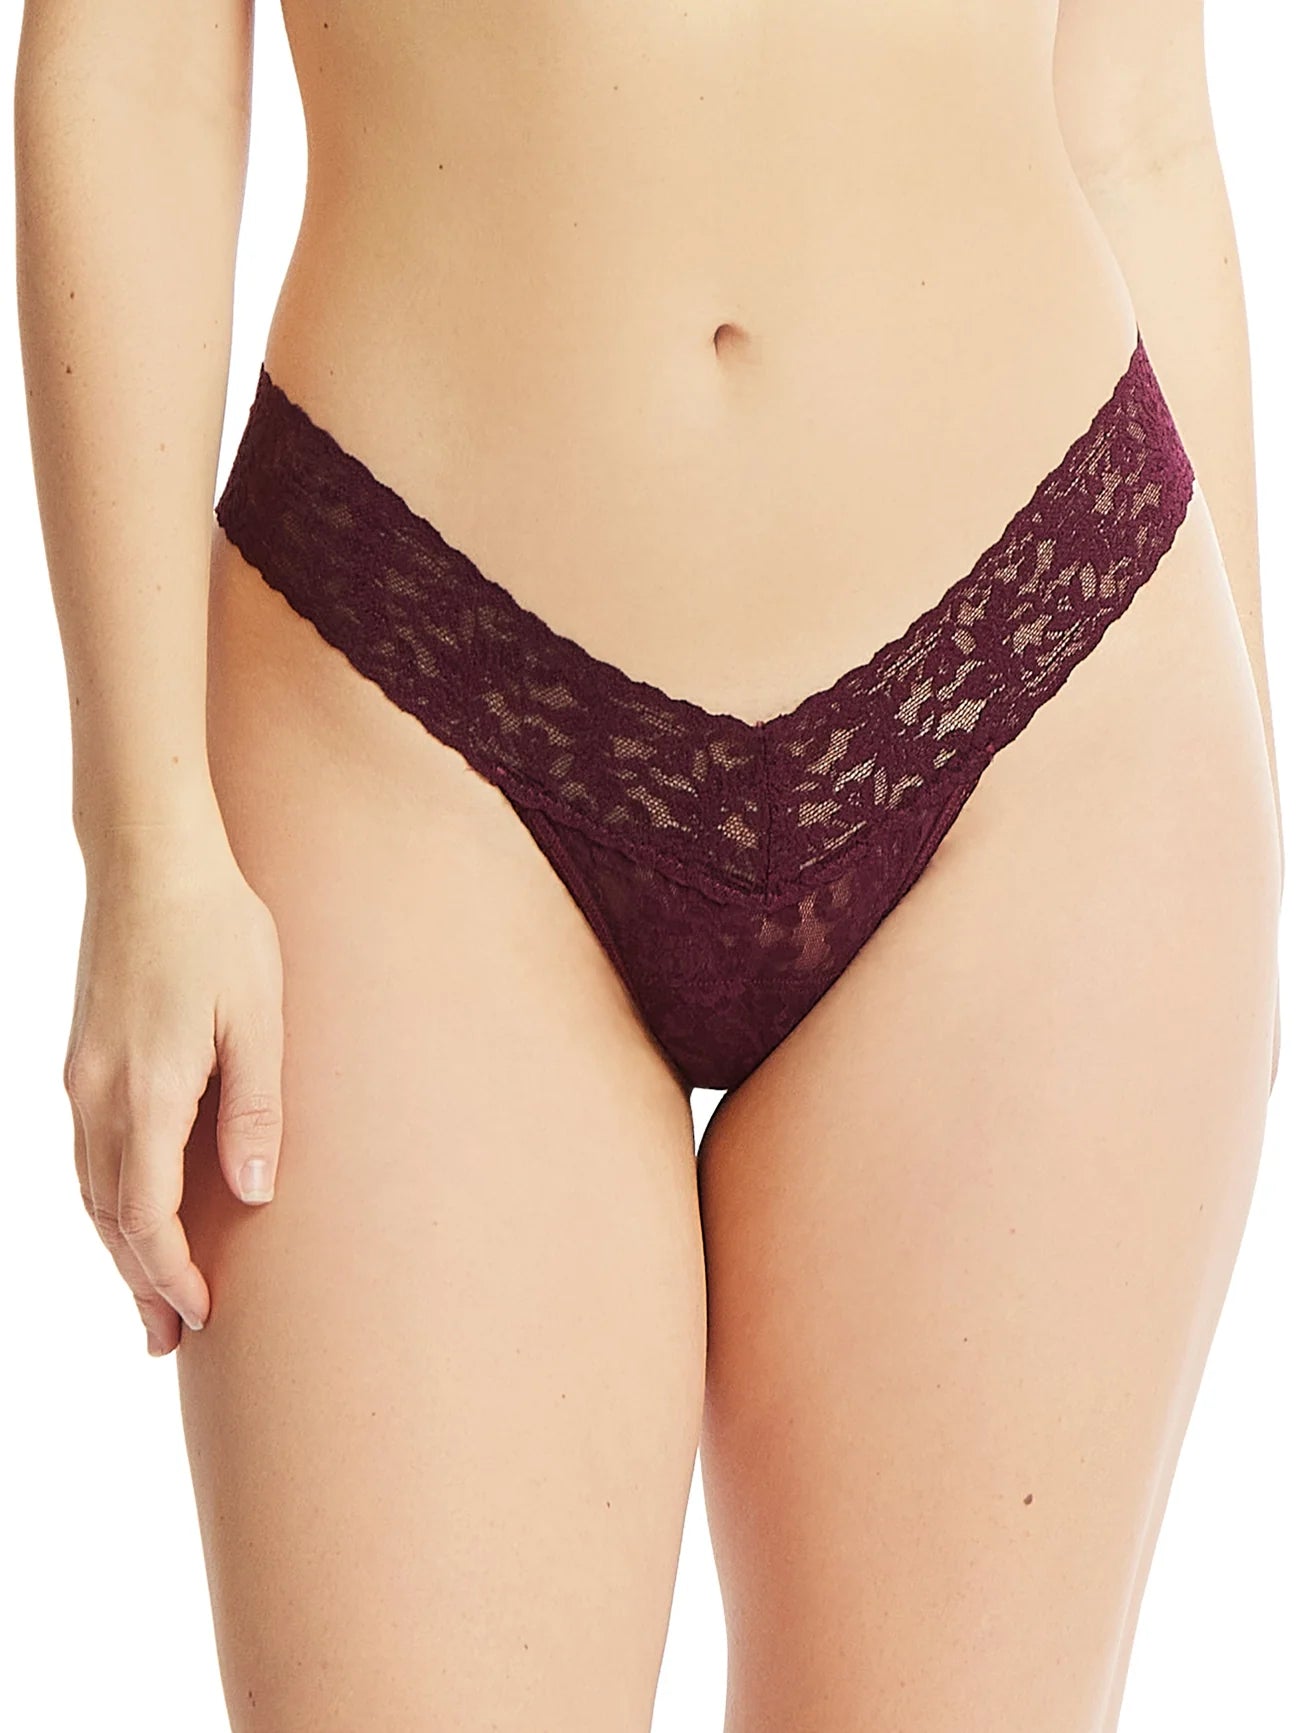 Hanky Panky Signature Lace Low Rise Thong - Packaged 4911p